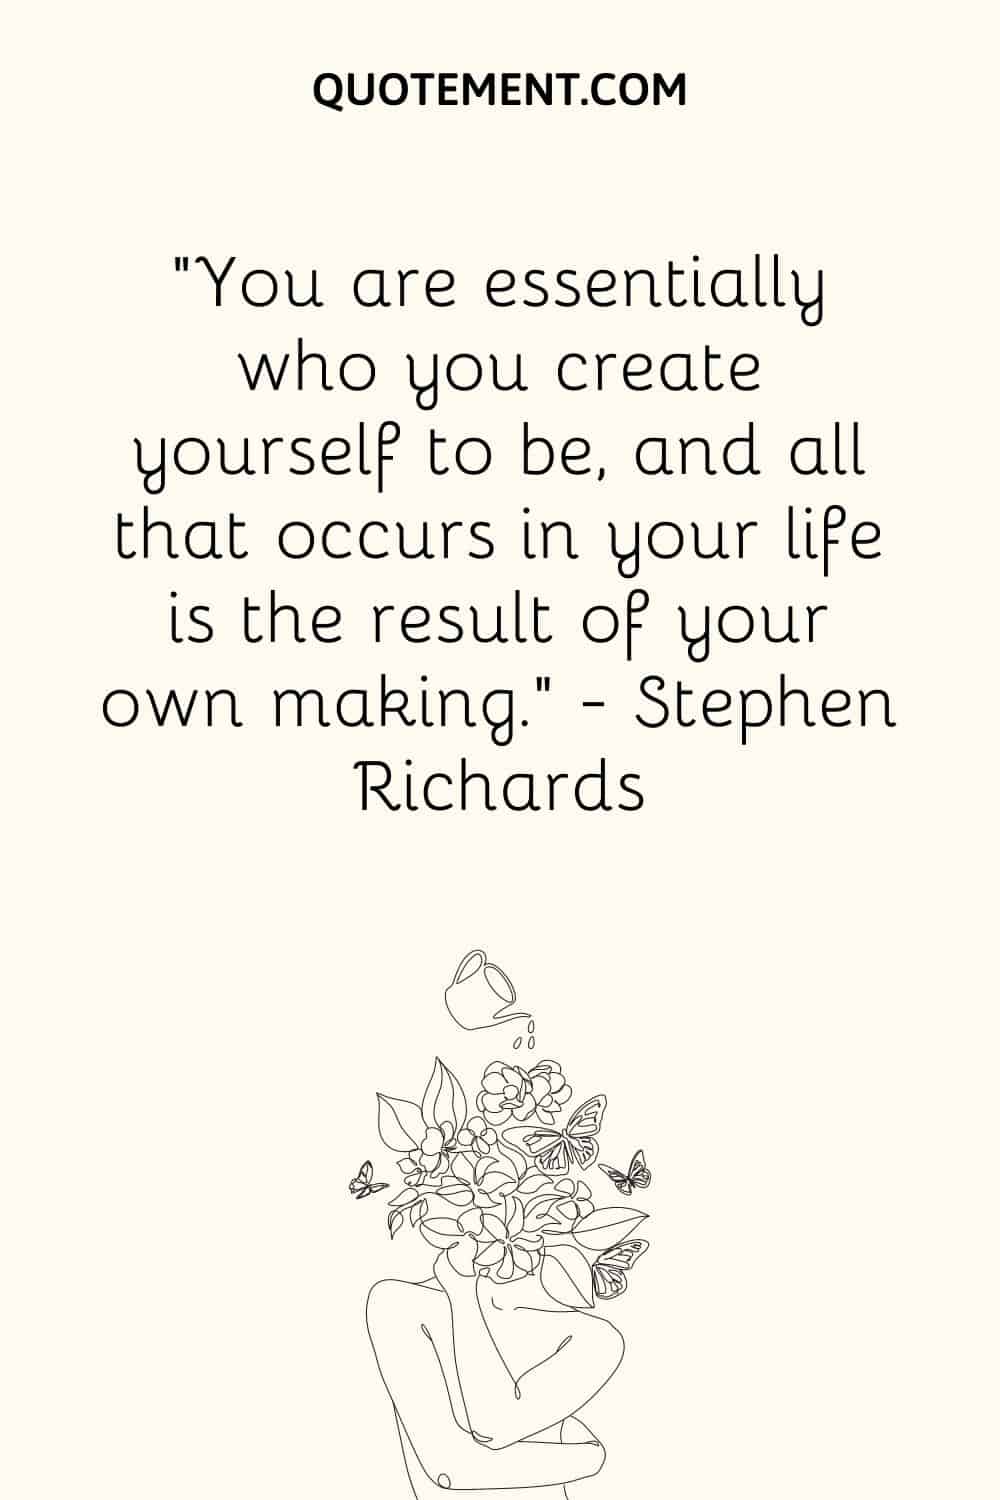 You are essentially who you create yourself to be, and all that occurs in your life is the result of your own making